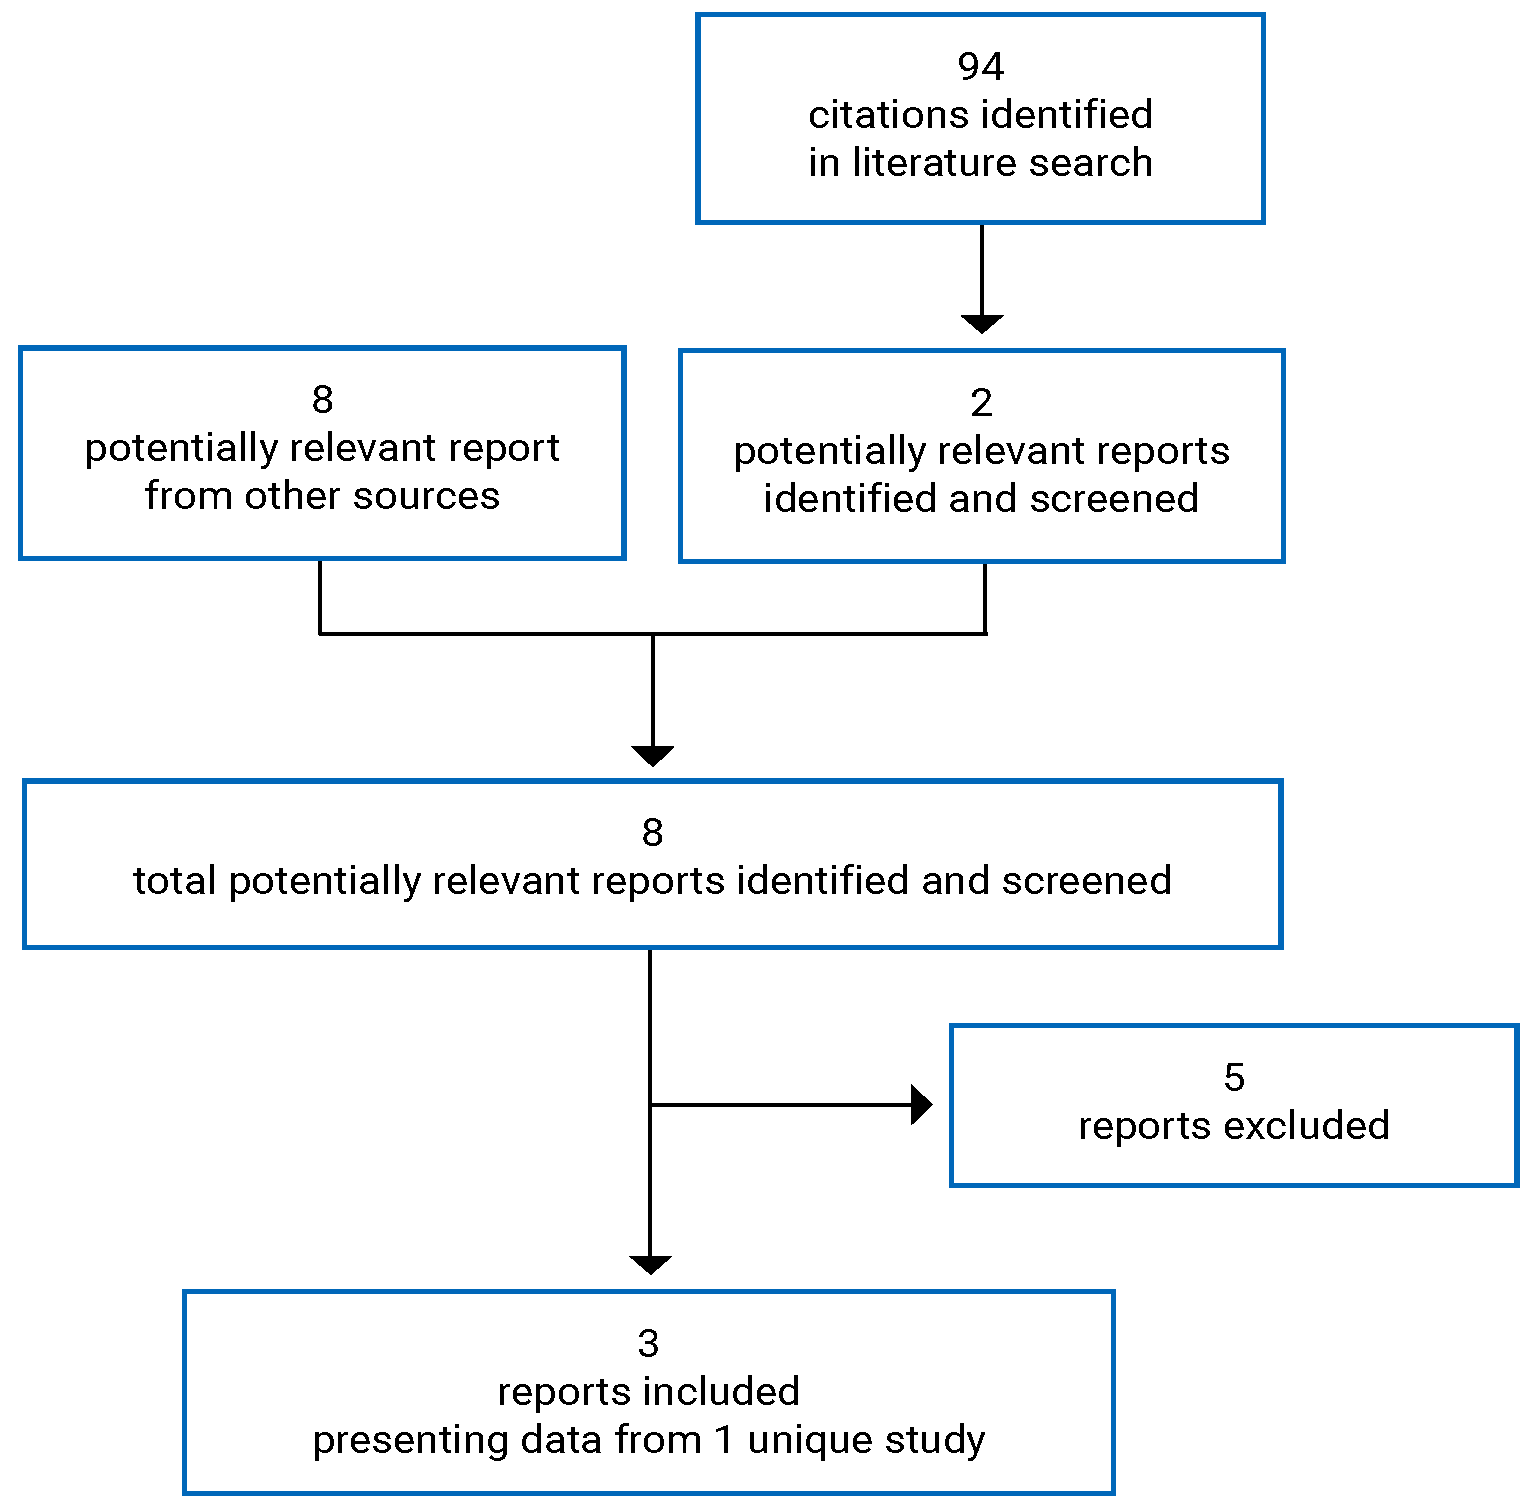 In total, 94 citations were identified from the literature search and 8 were identified from other sources. A total of 8 potentially relevant reports were identified, 5 were excluded. 3 reports of 1 study are included in the review.